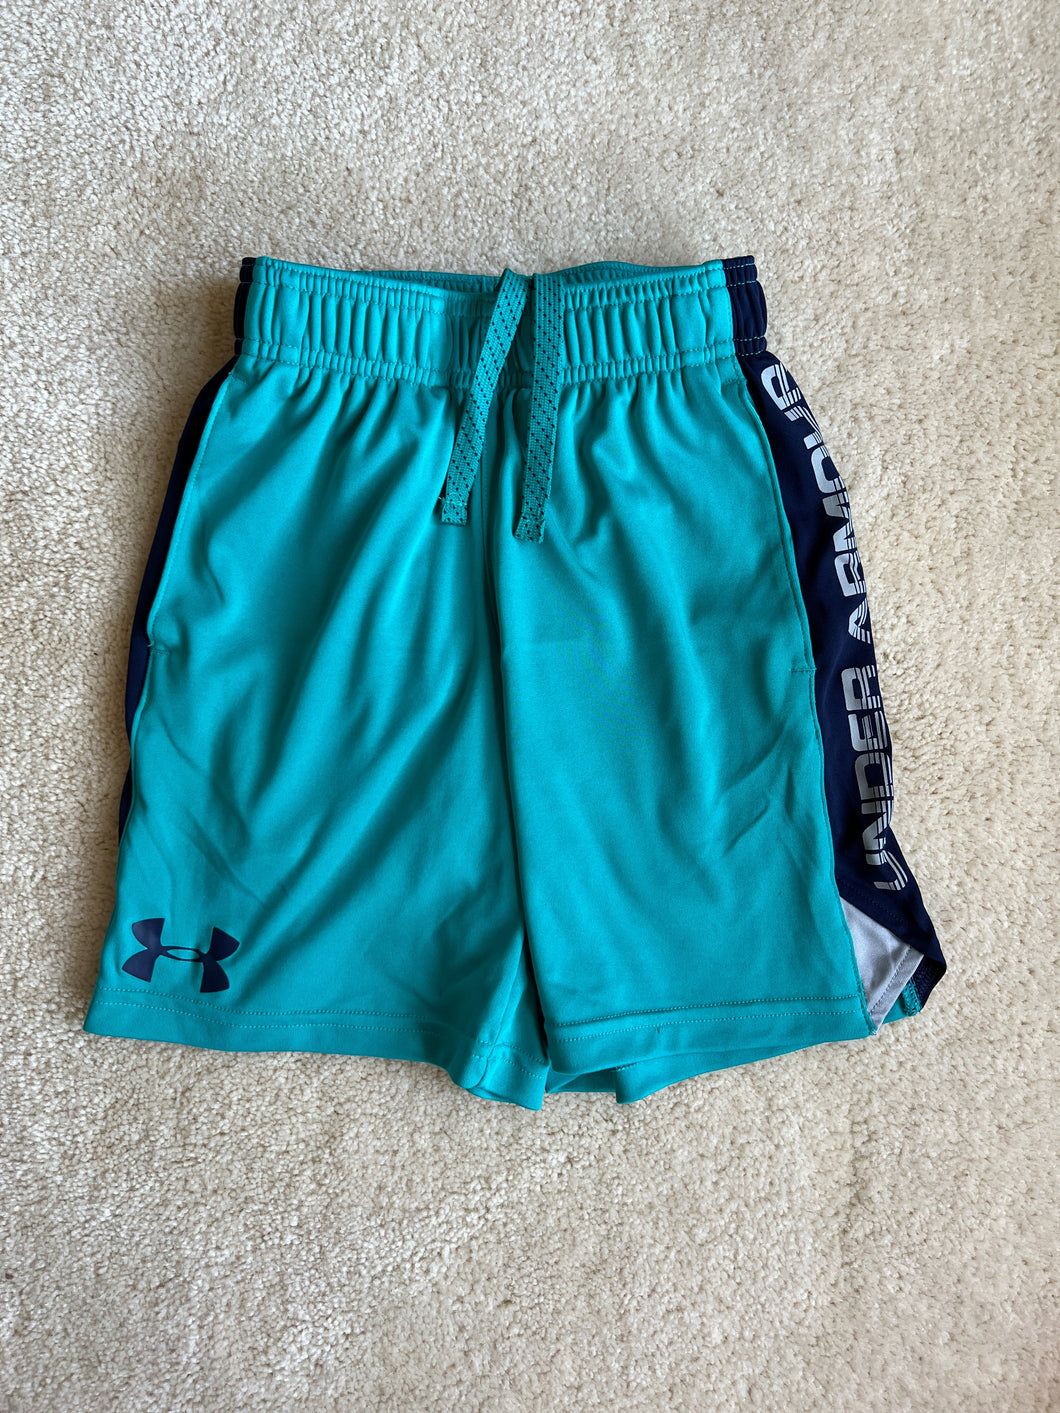 Under Armor basketball shorts teal and navy XS